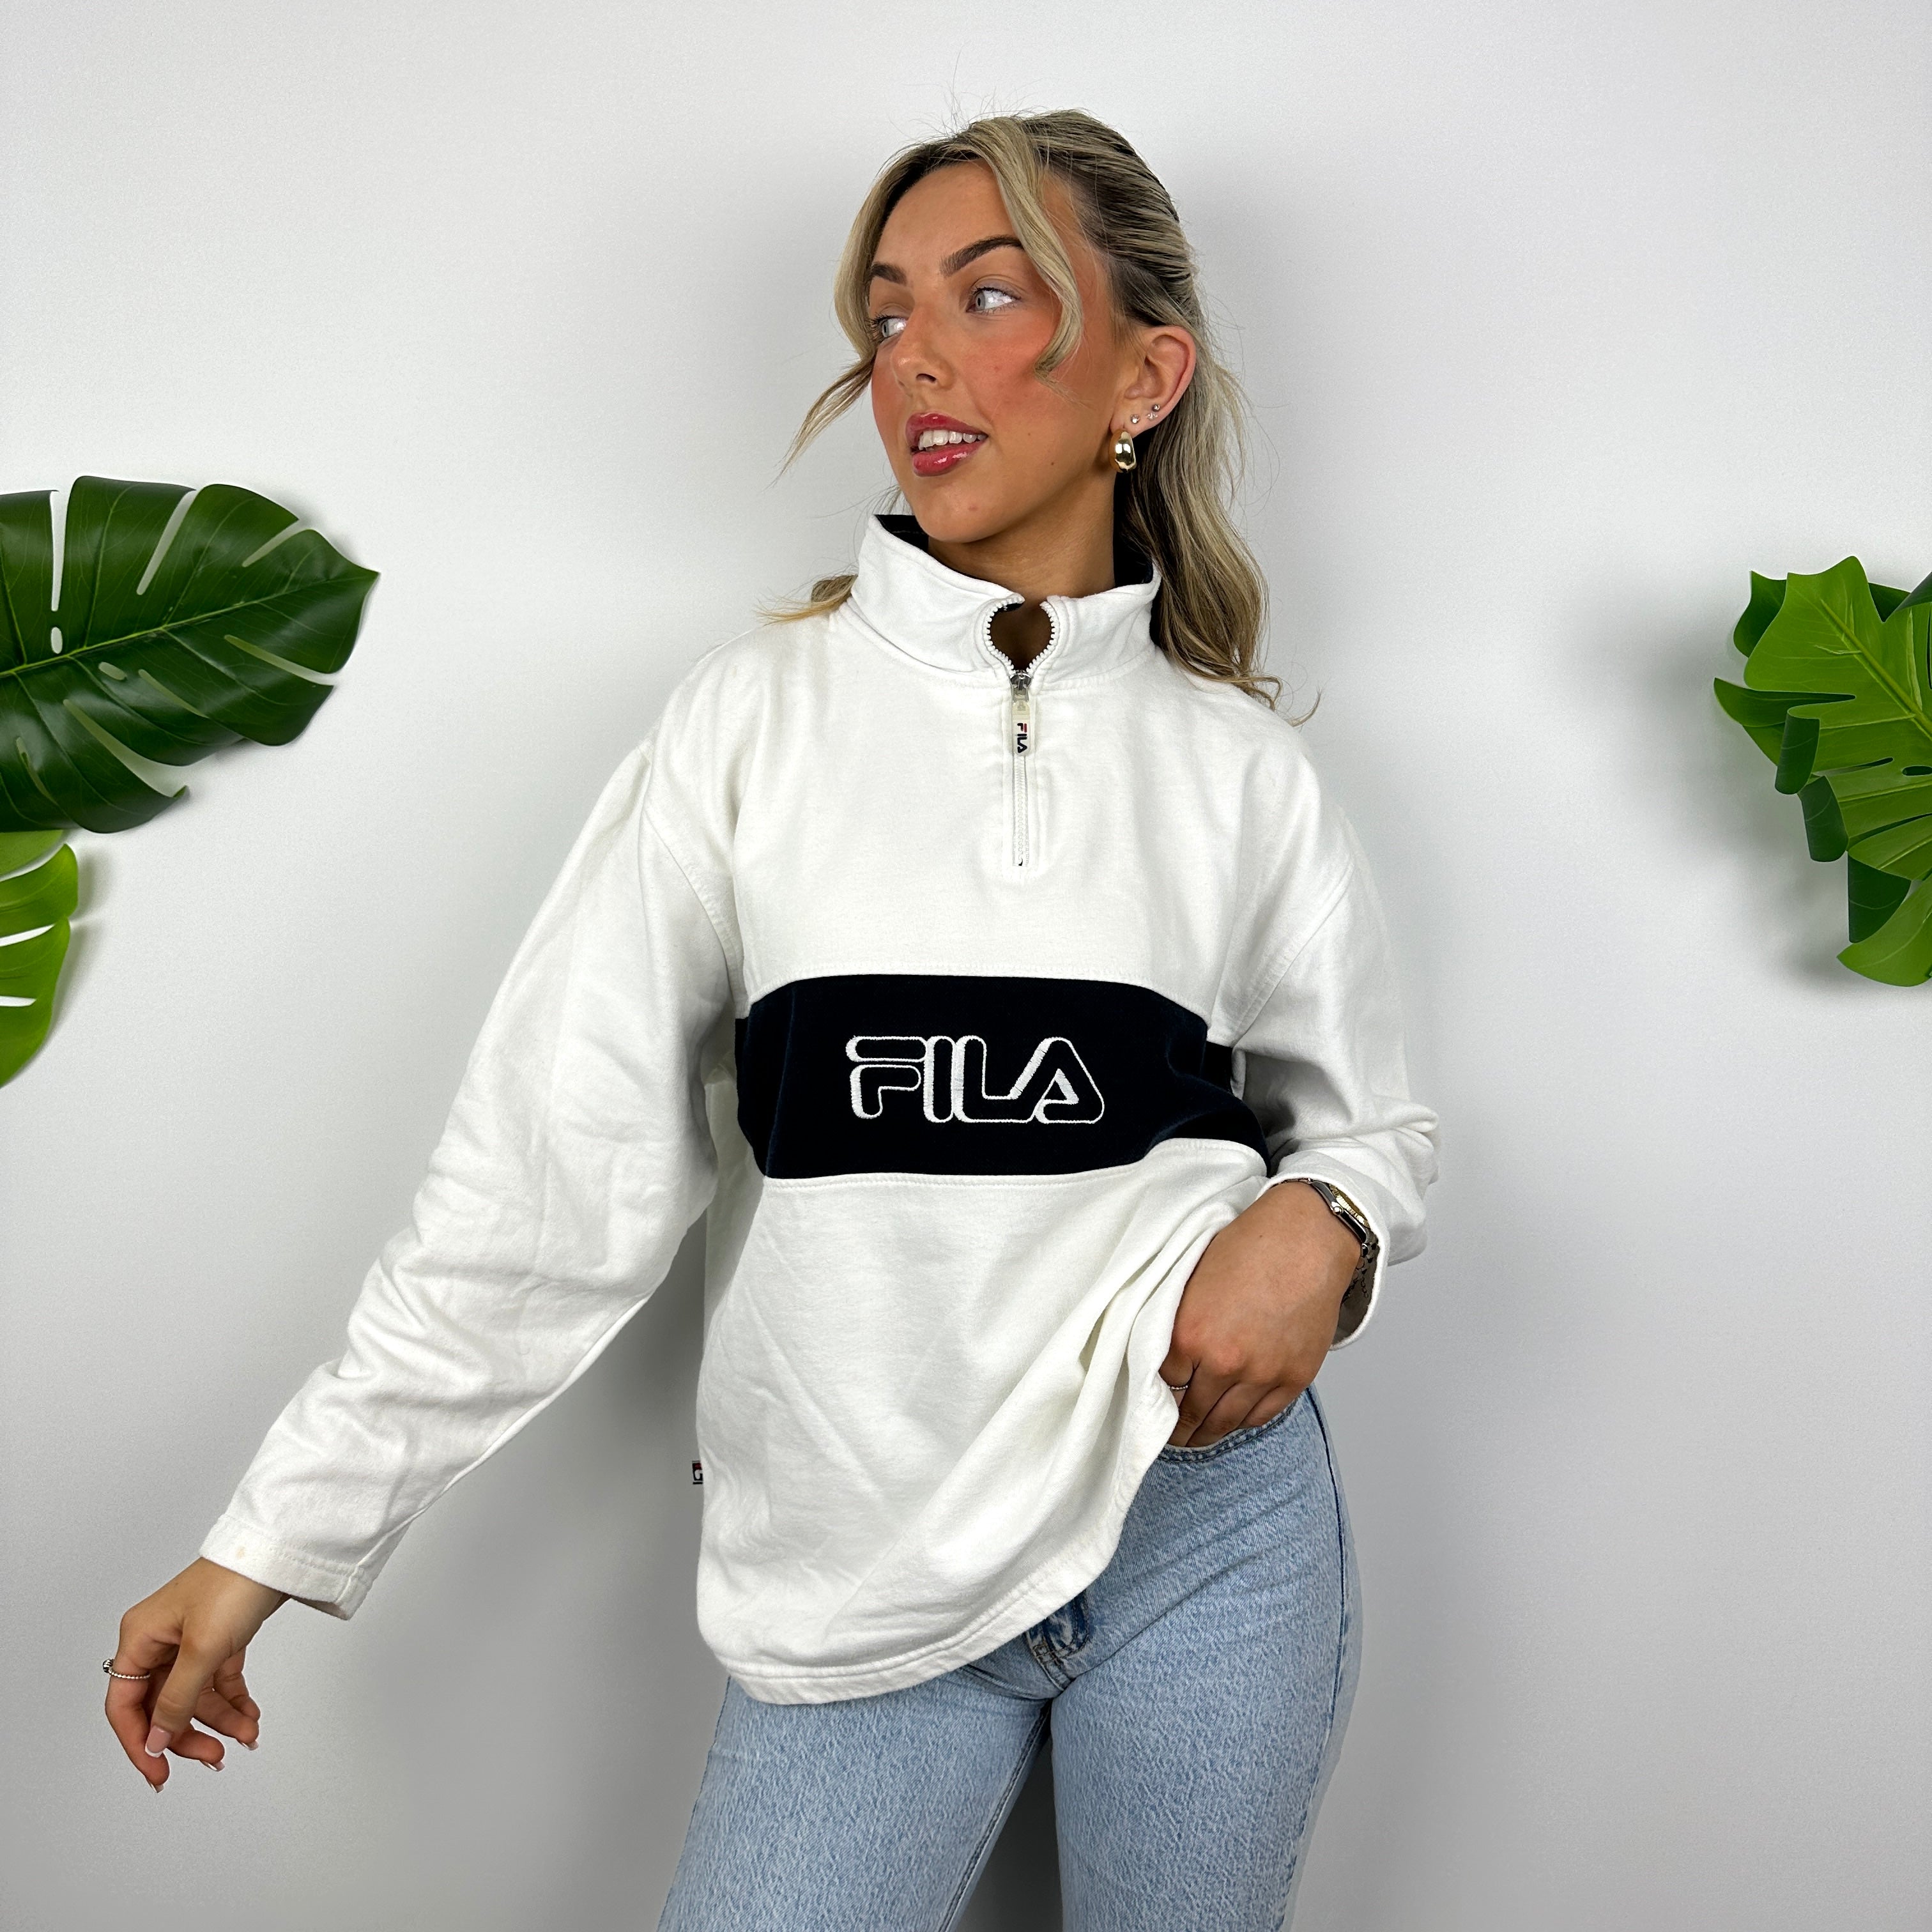 FILA White Embroidered Spell Out Quarter Zip Sweatshirt (M)